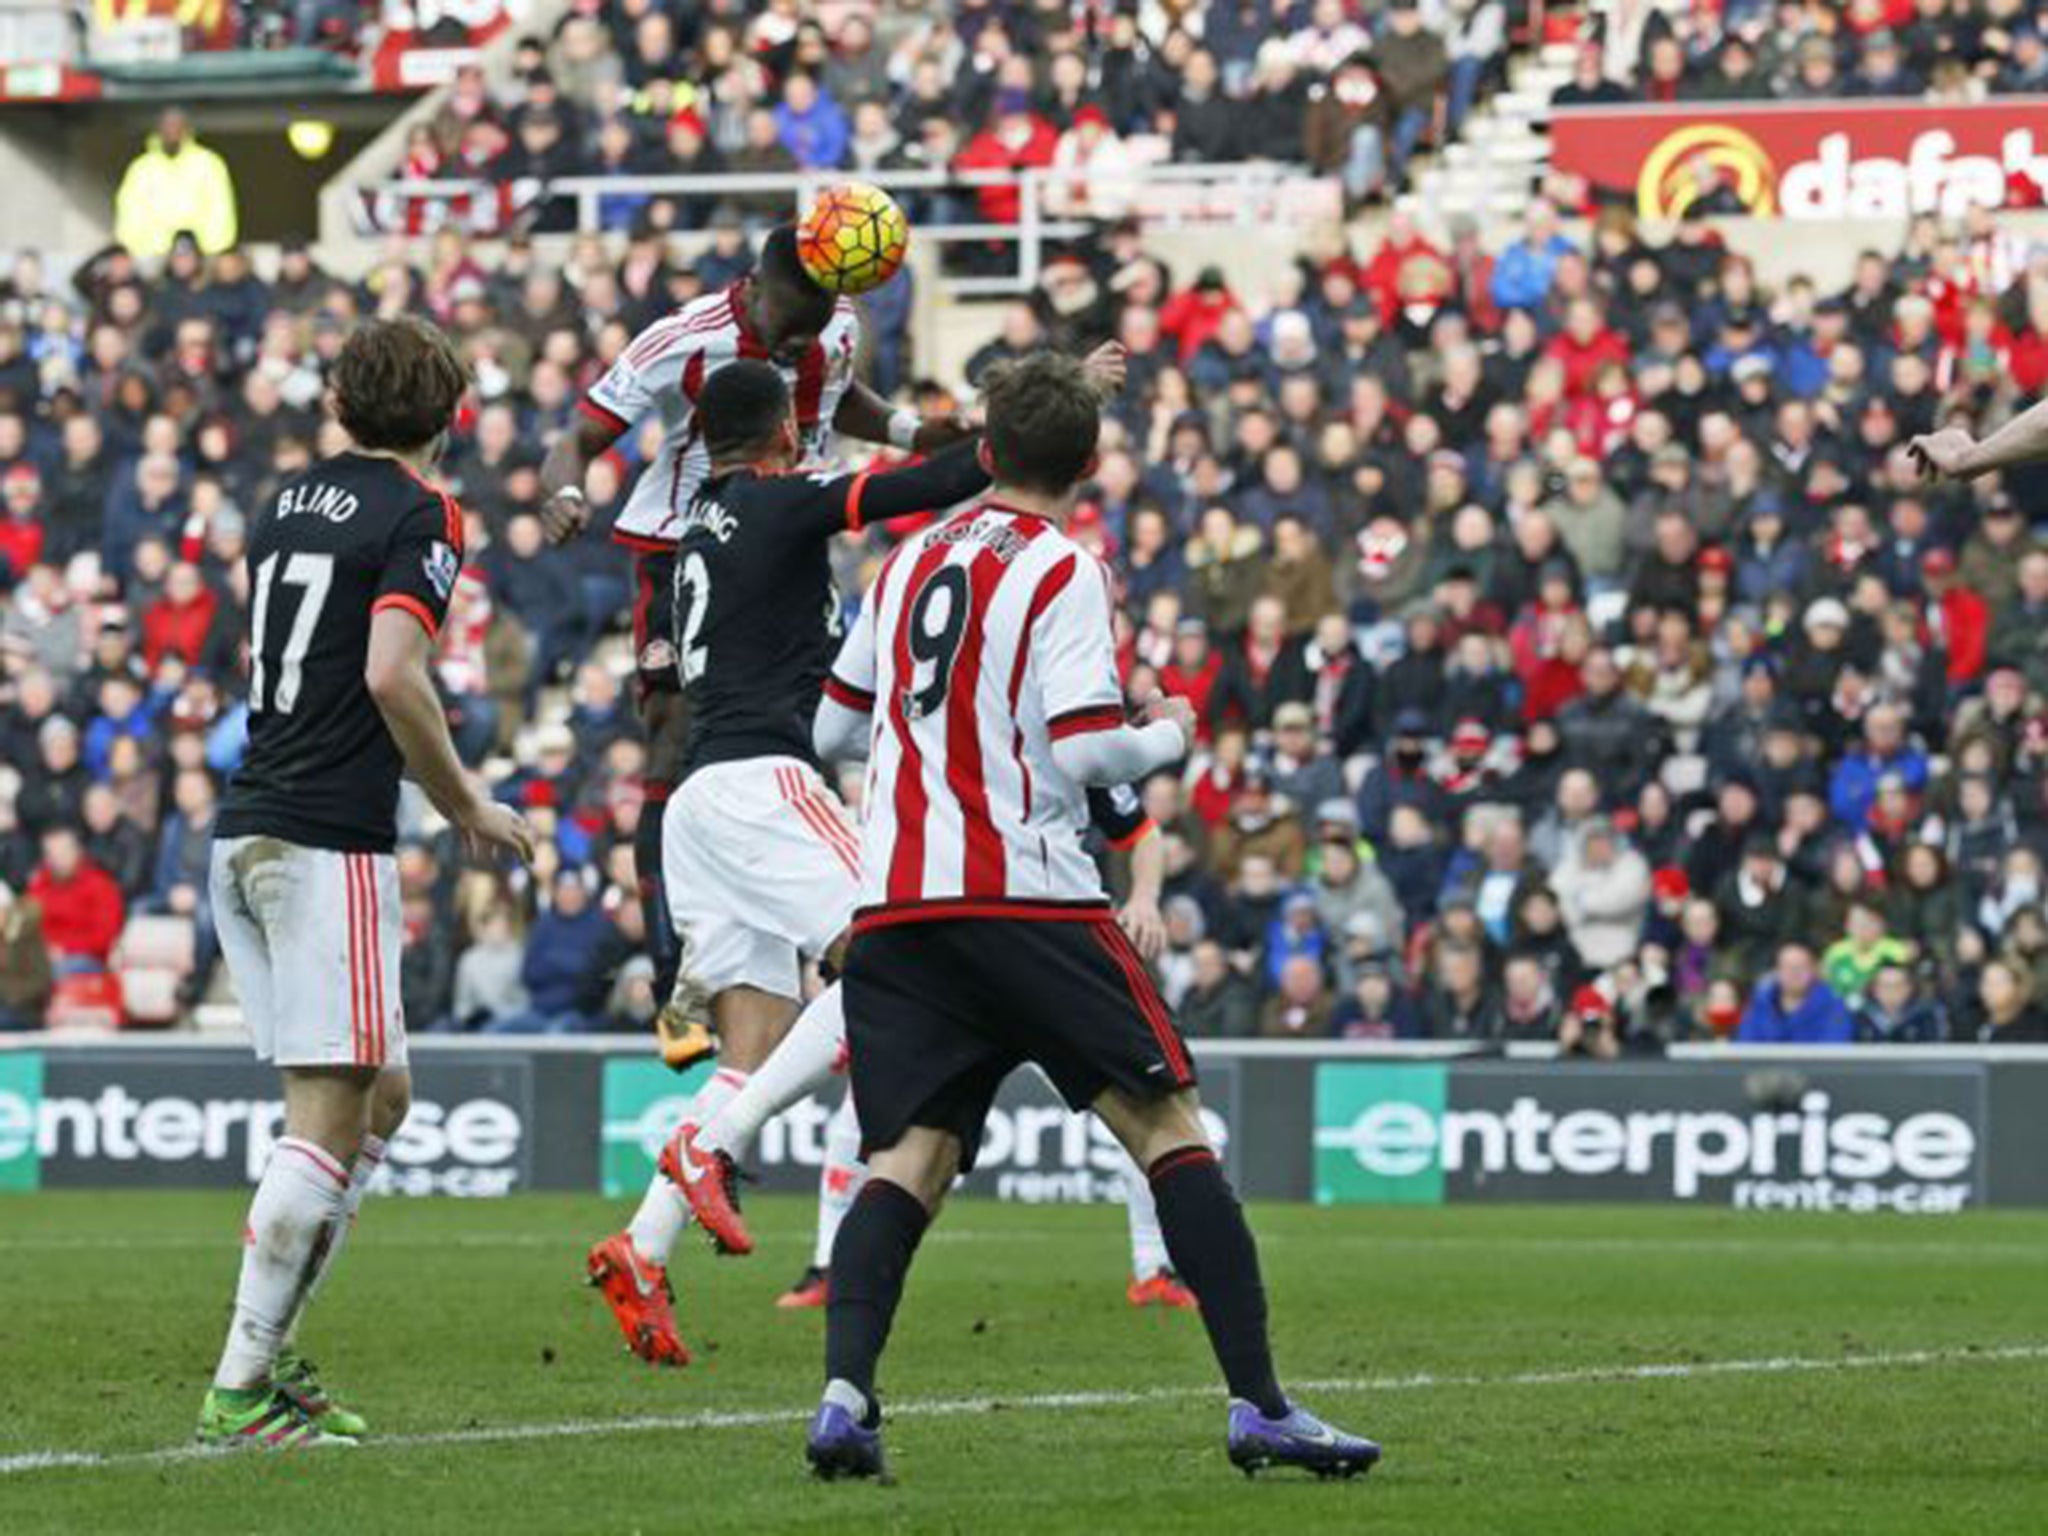 Lamine Koné’s header went in off David de Gea to give Sunderland a late 2-1 victory